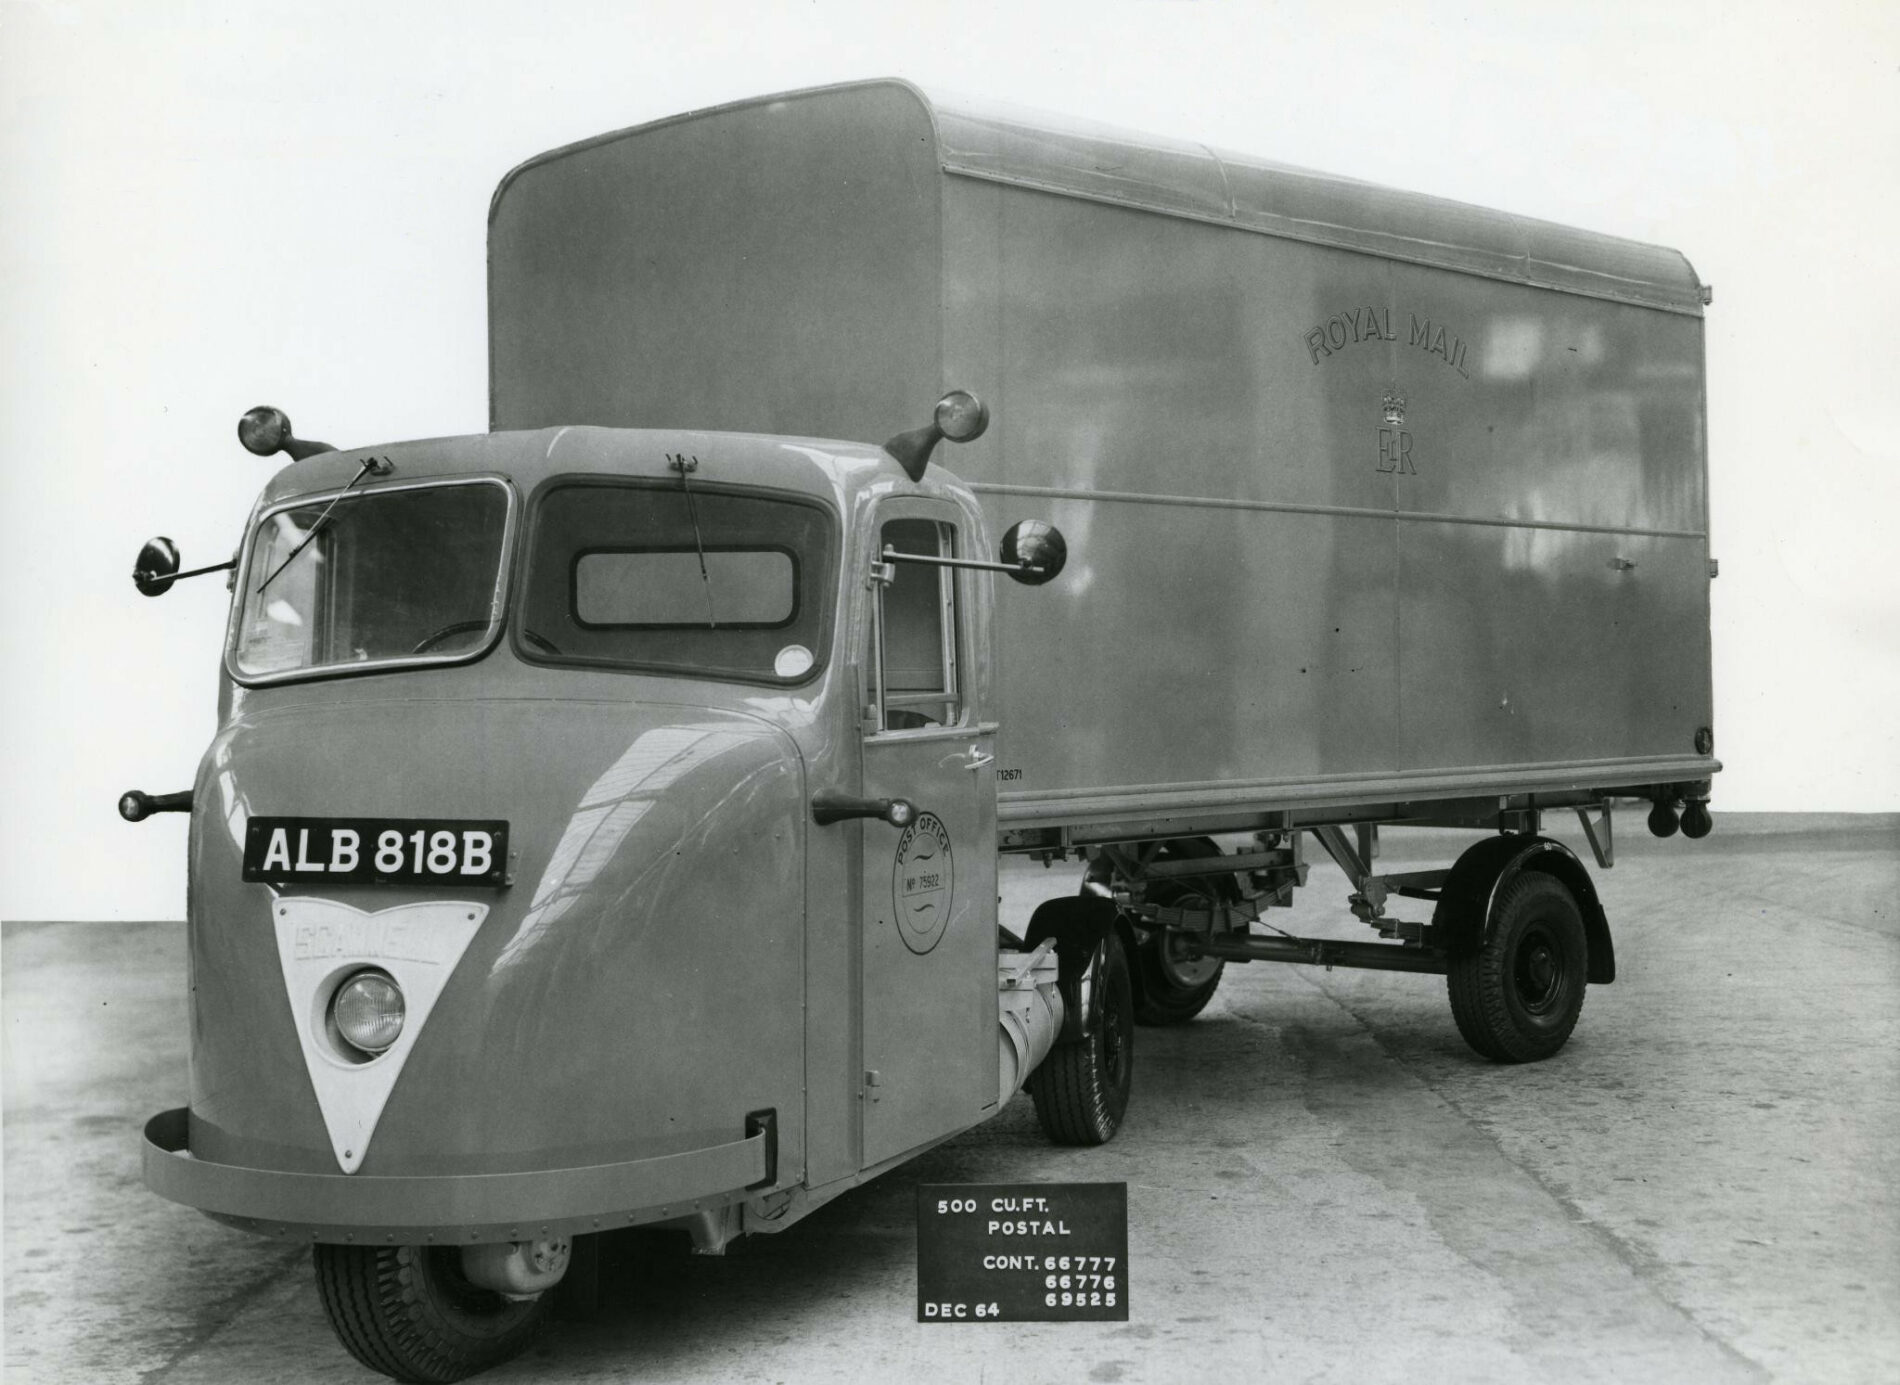 Scammell Scarab mechanical horse British Post Office vehicle